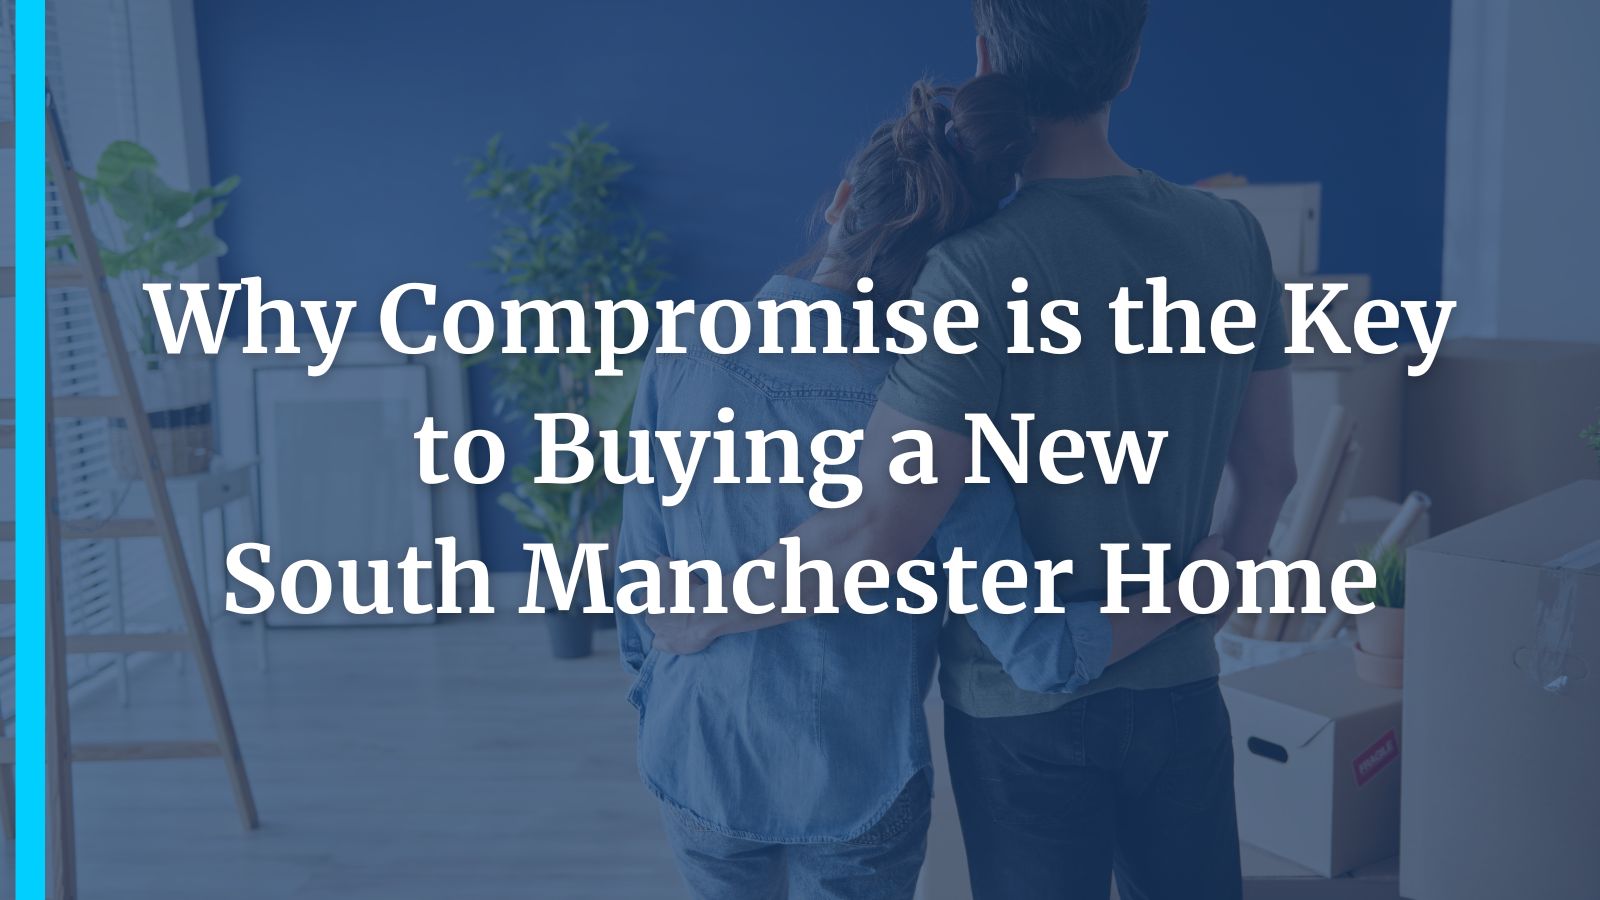 Why Compromise is the Key to Buying a New South Manchester Home